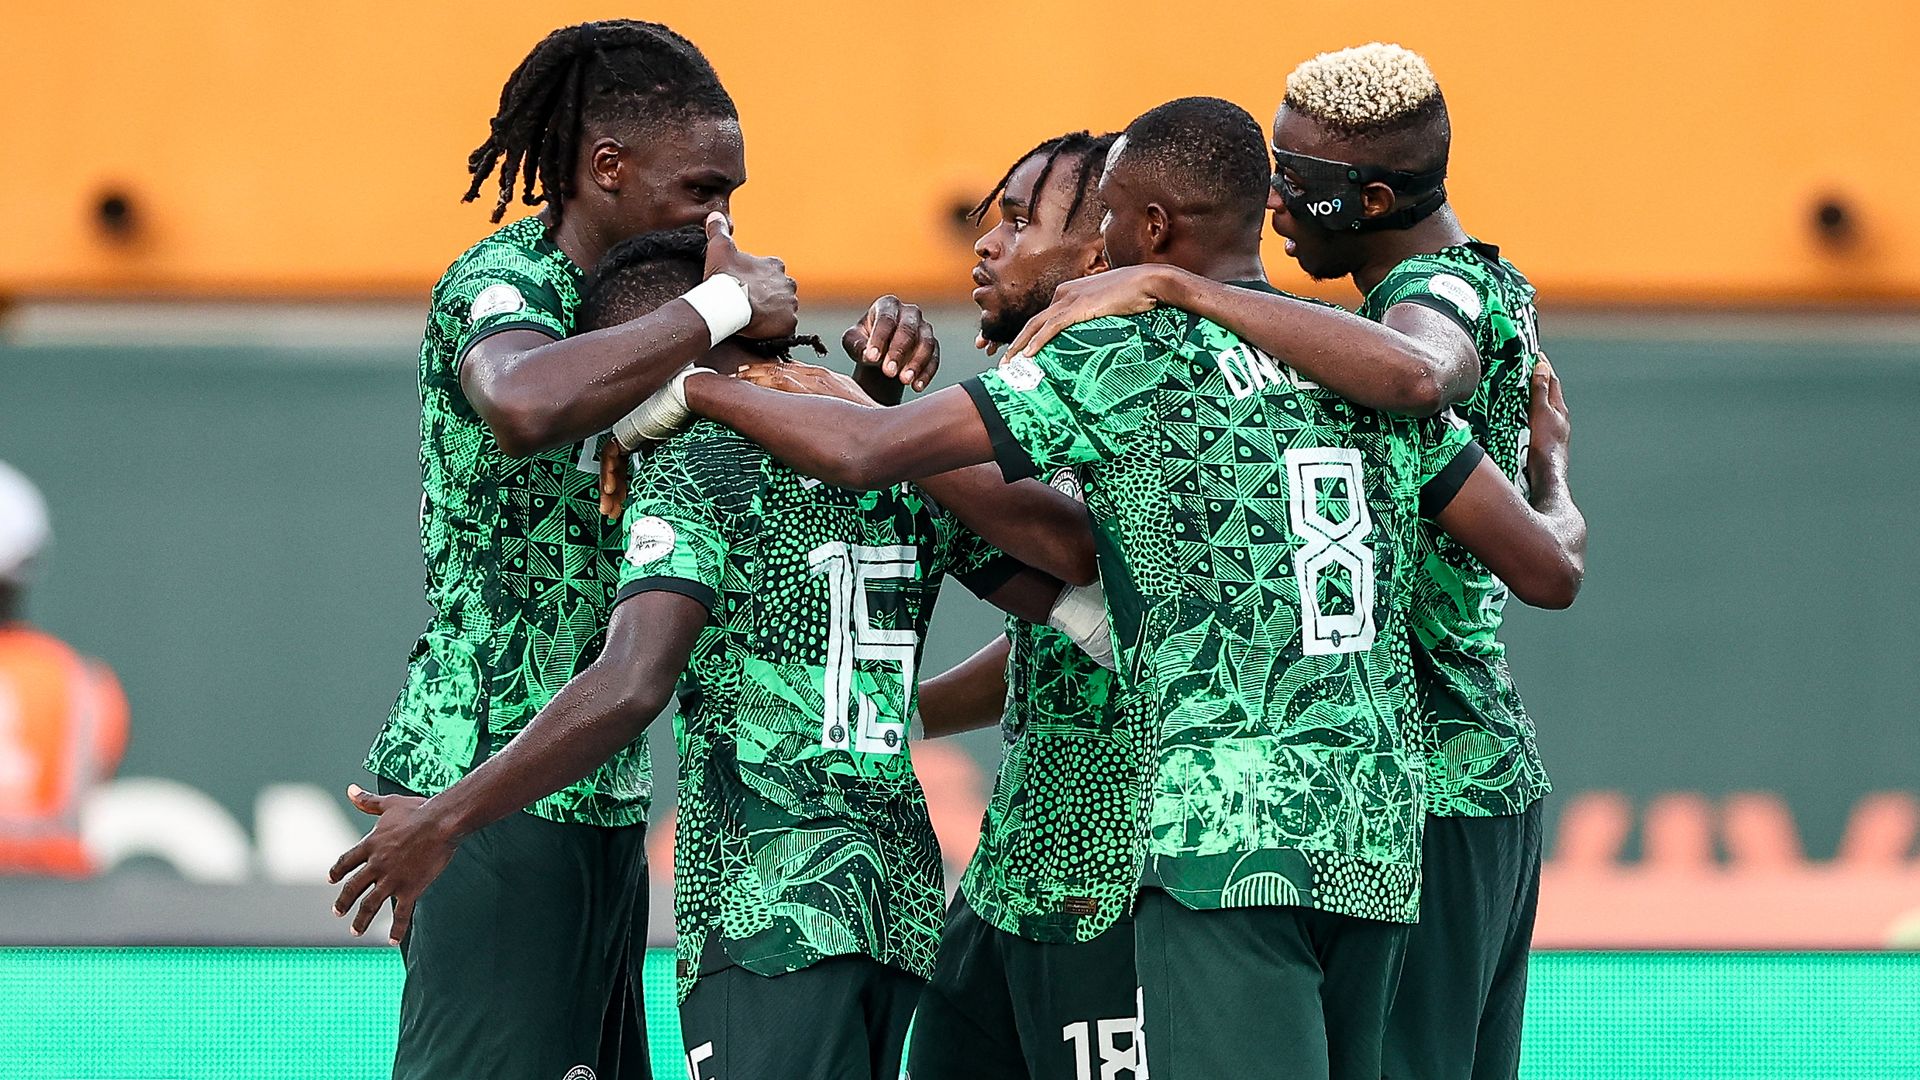 Nigeria through to AFCON semis after edging Angola